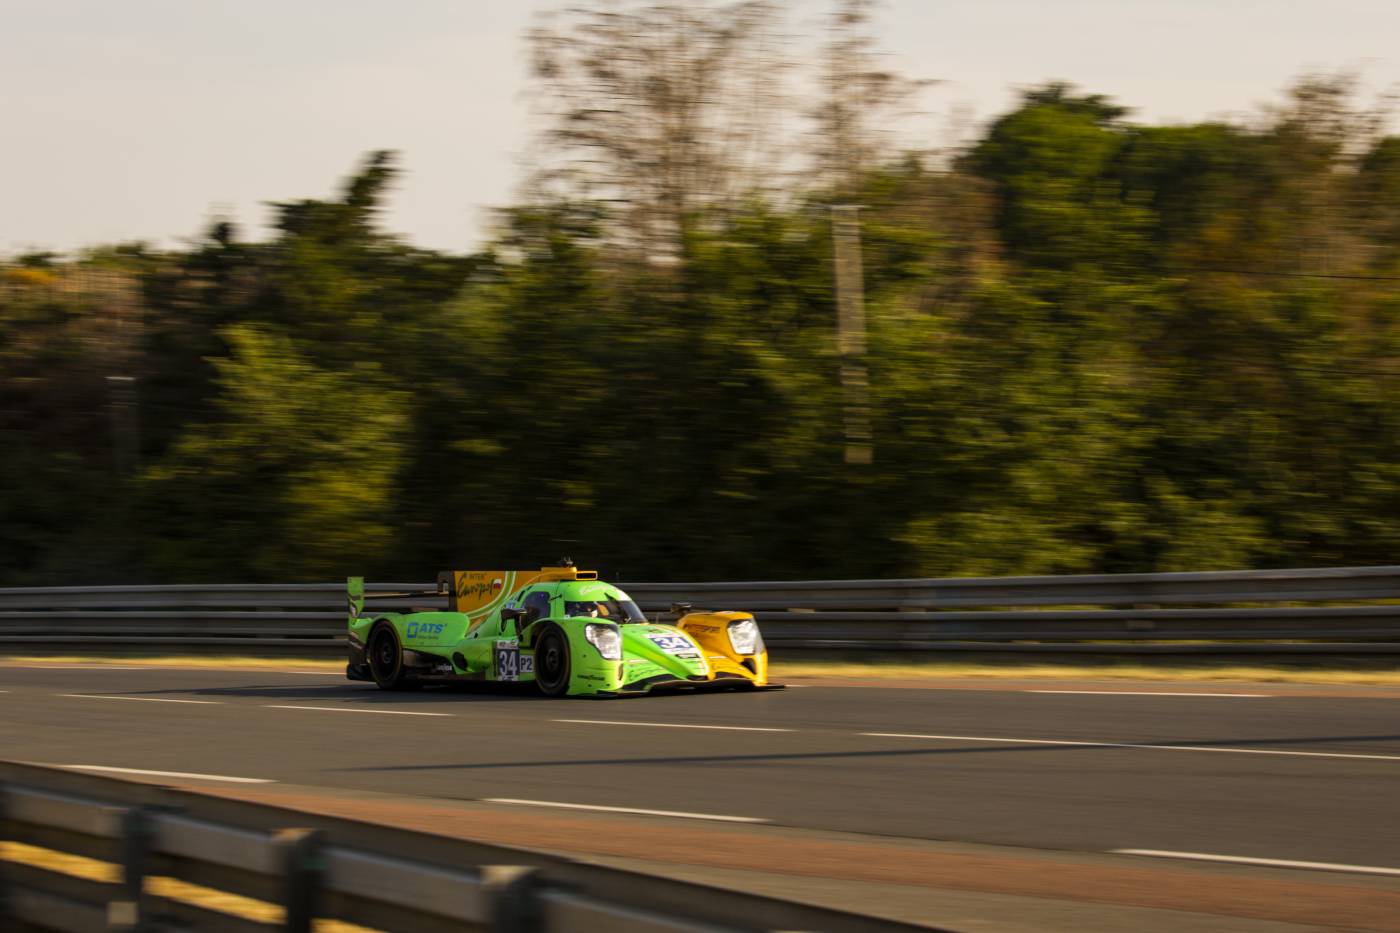 24H of Le Mans | Inter Europol Competition in the lead eight hours into a chaotic race